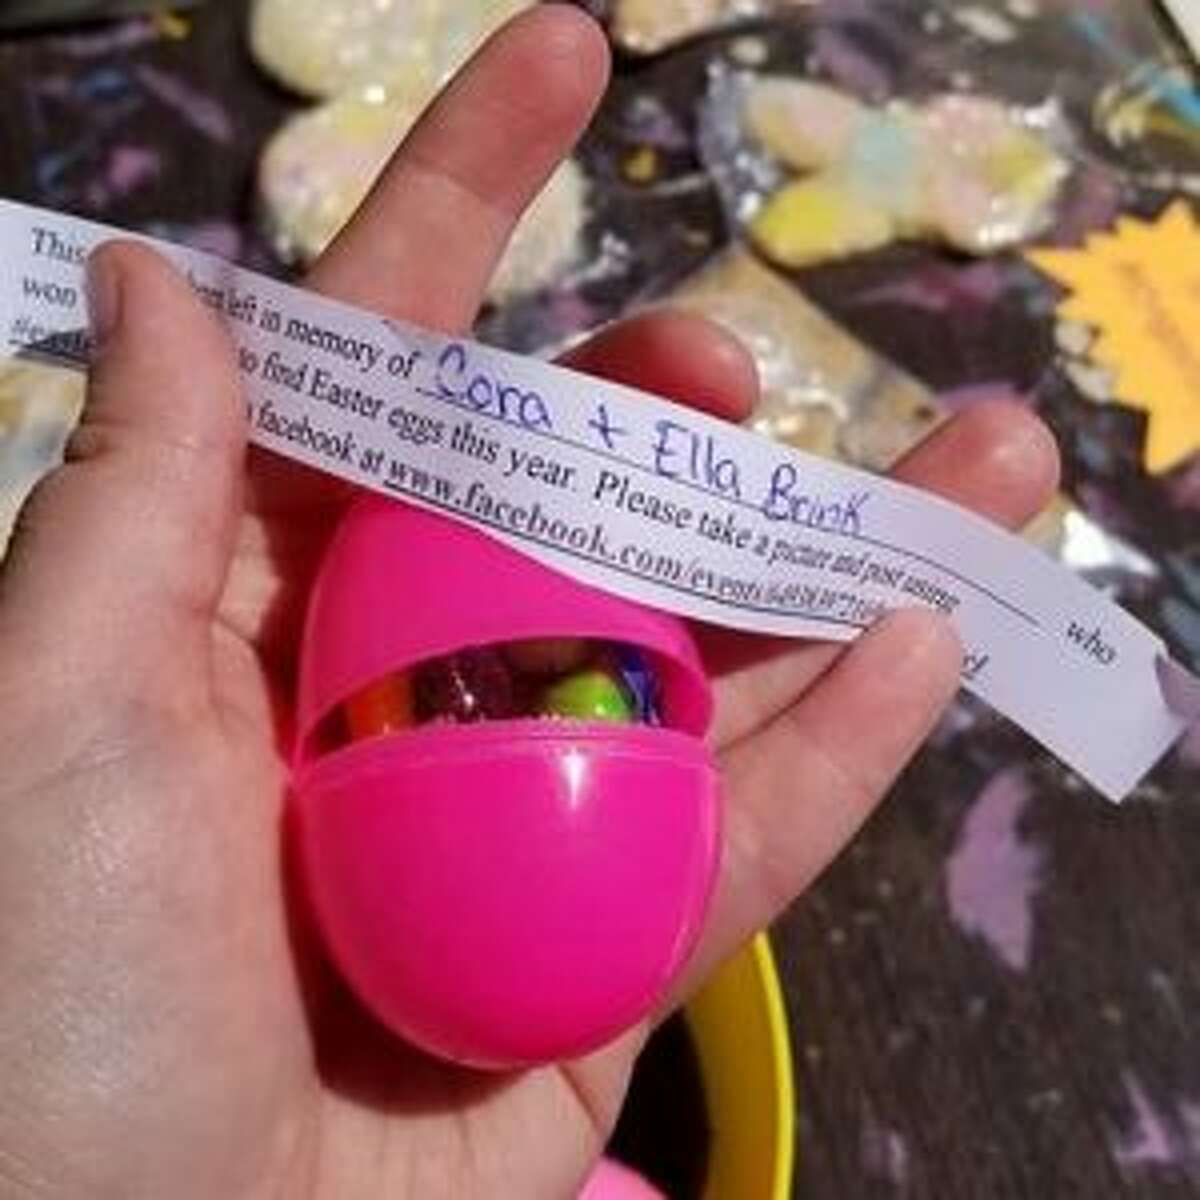 Those who find the hidden eggs are asked to post on the Easter Eggs for Heaven page on Facebook. (Courtesy Photo)